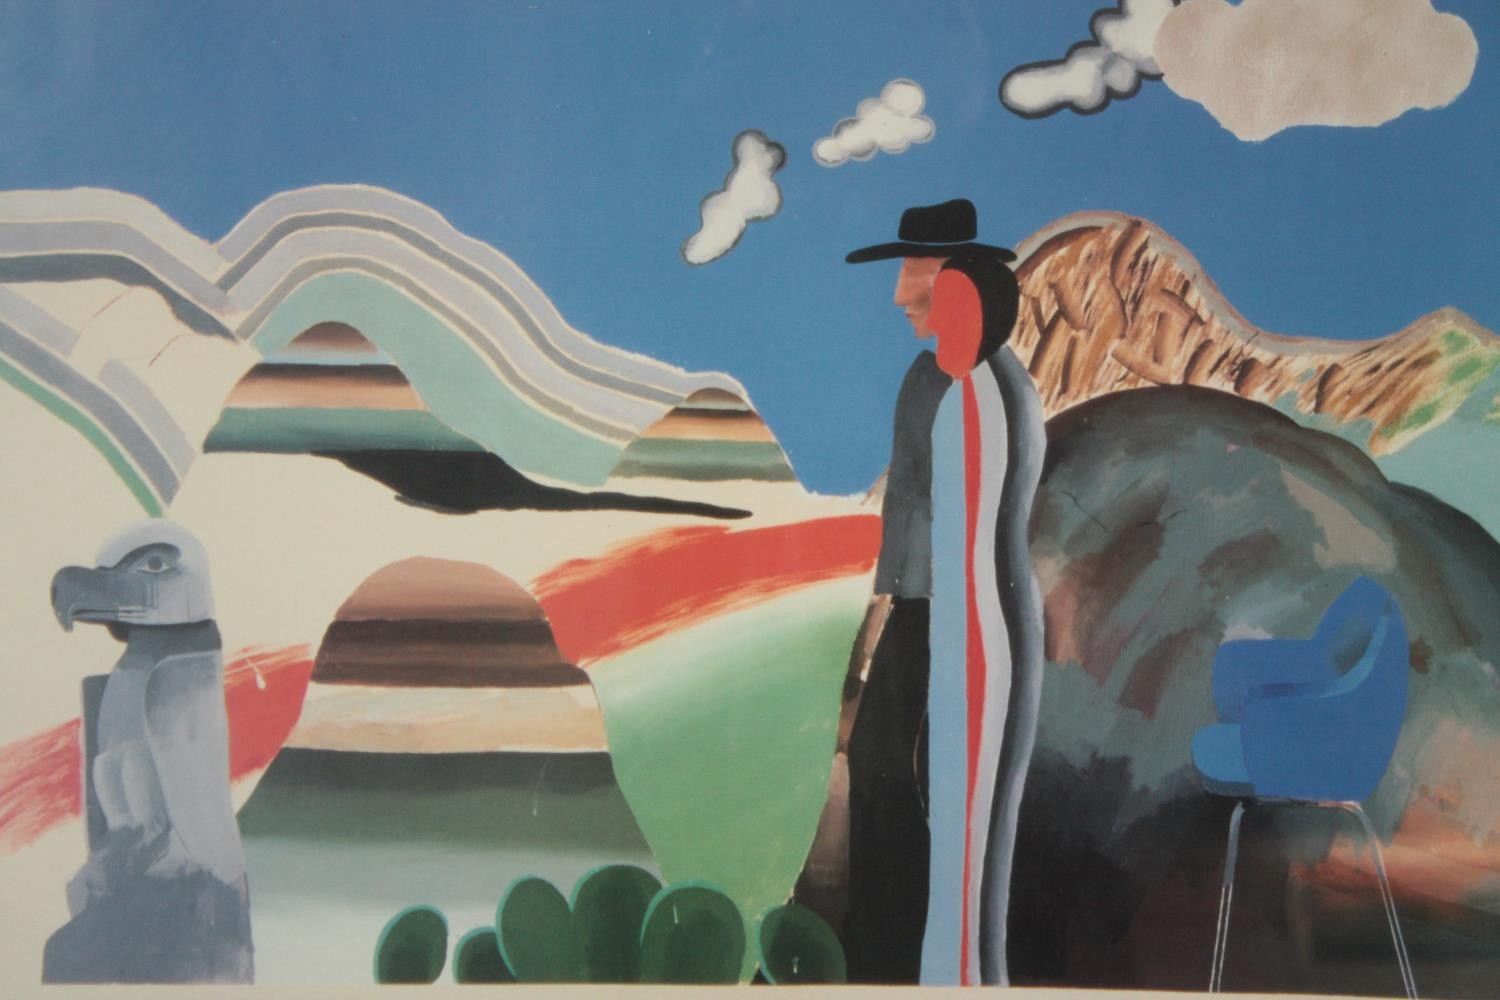 David Hockney. A poster printed by the Royal Academy for their Pop Art show which ran from Sep-Dec